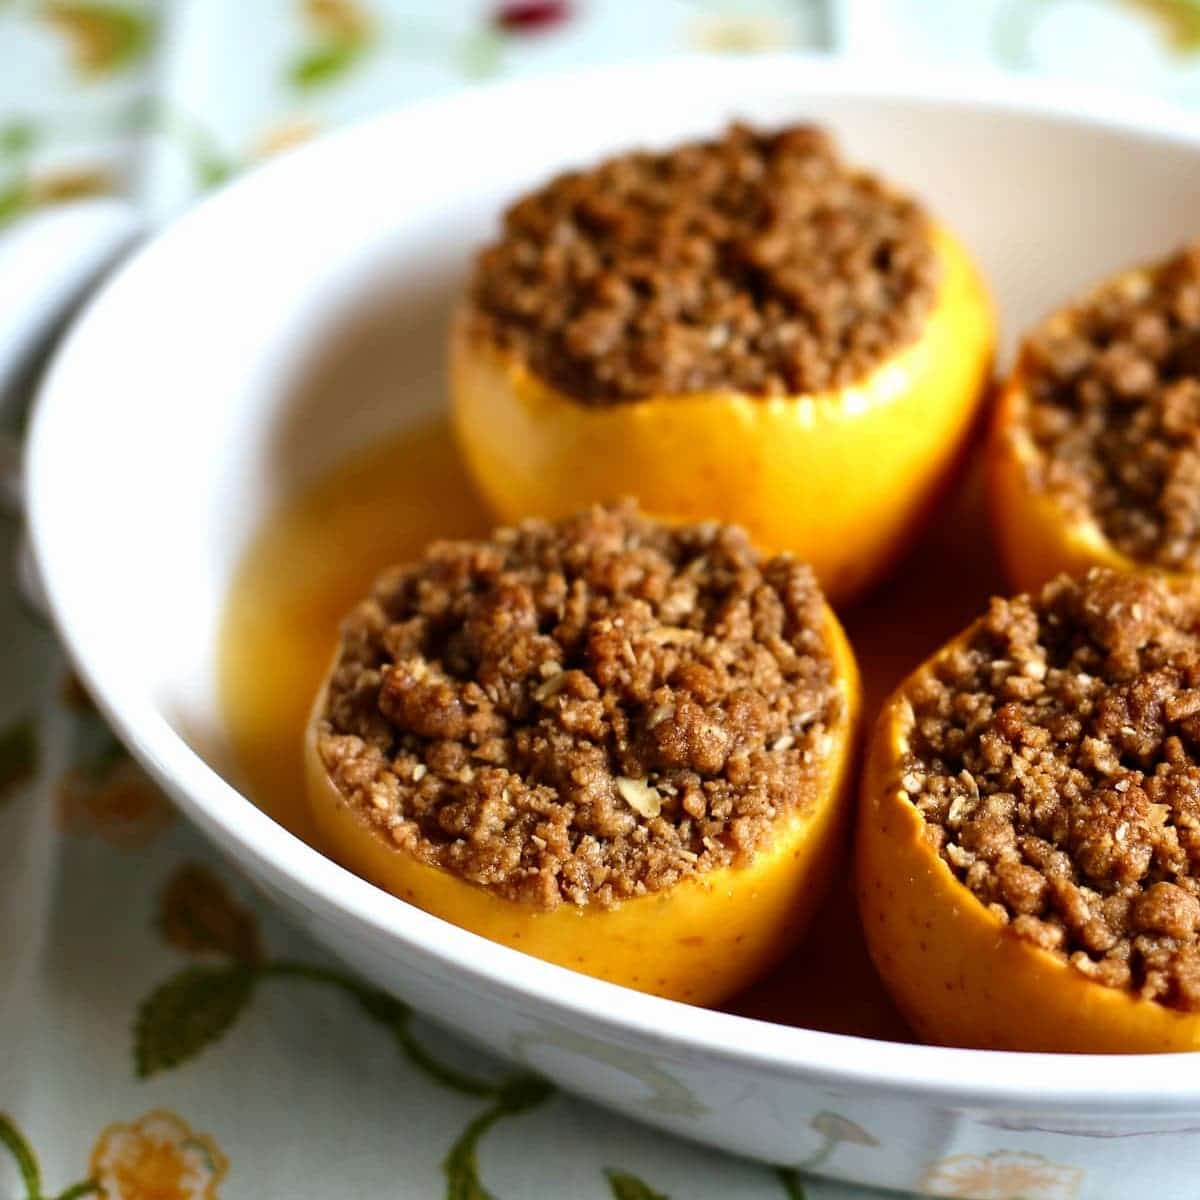 a baking dish of baked apples with crumble topping.